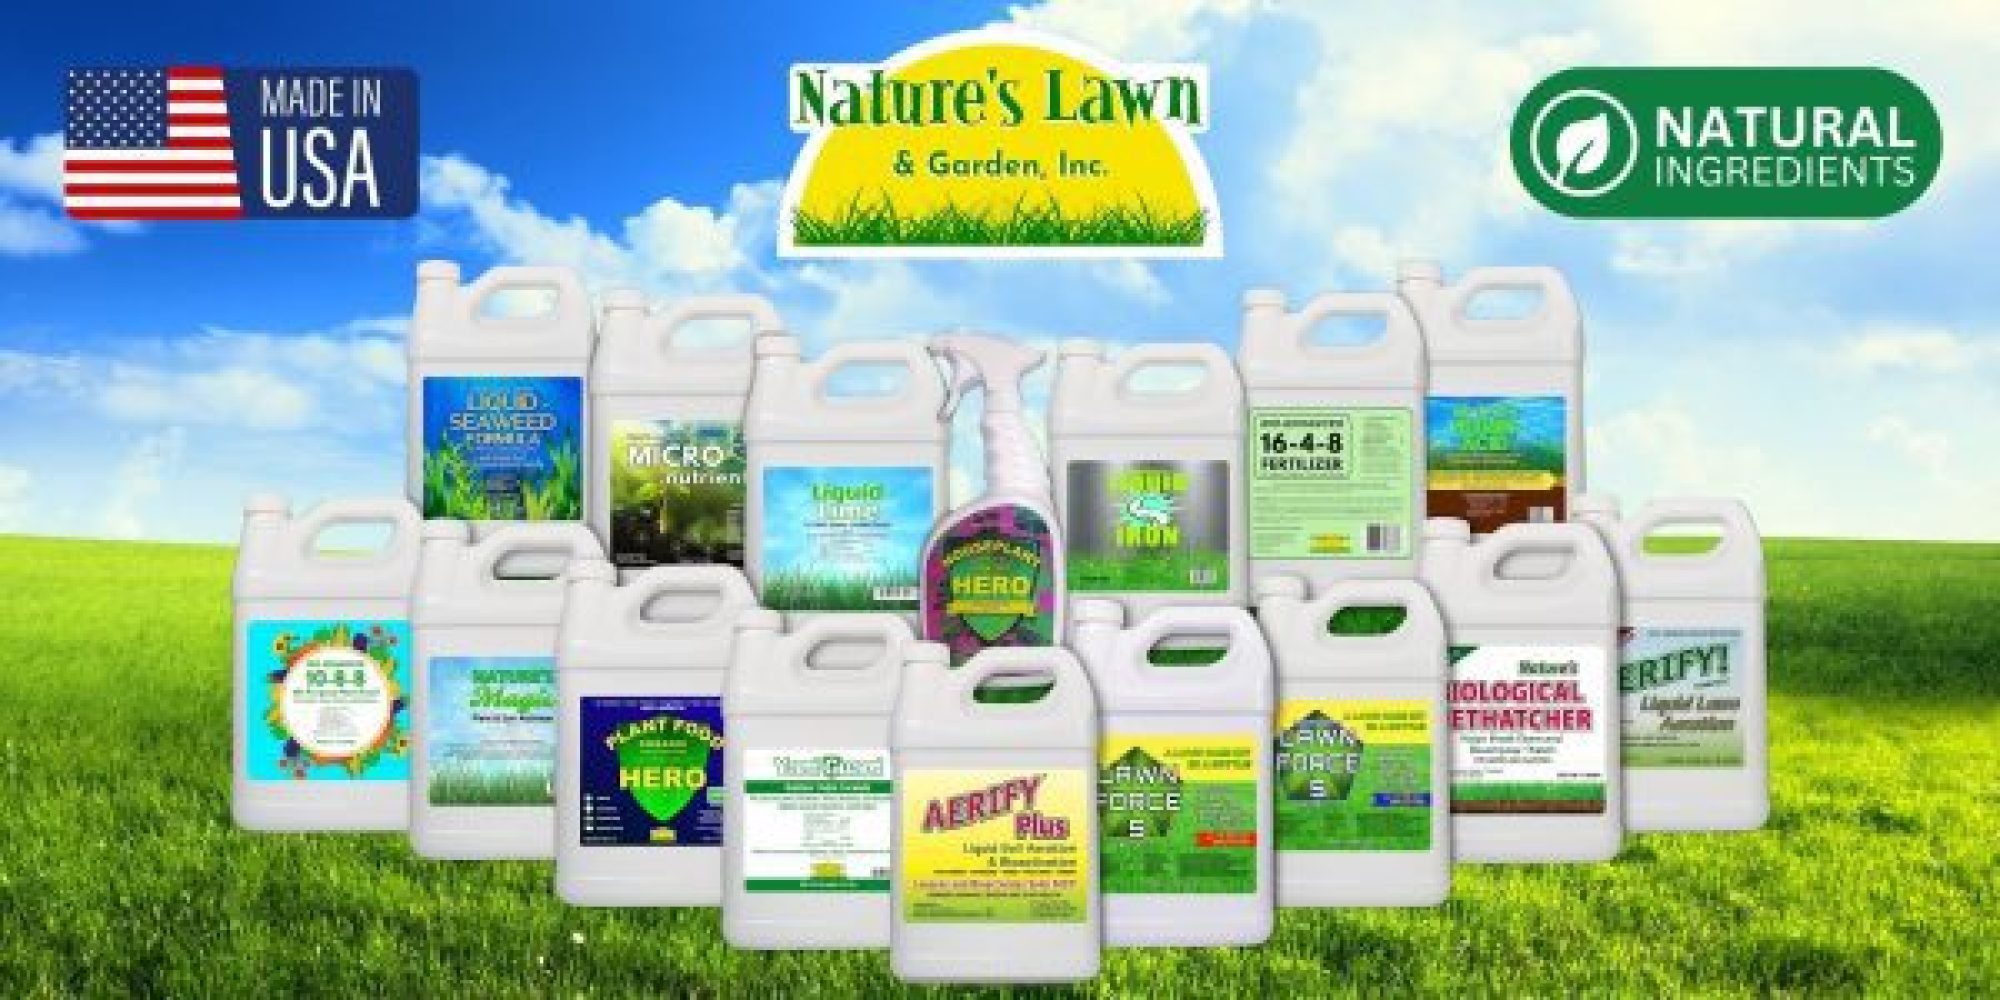 Brand Story Rectangle - Nature's Lawn